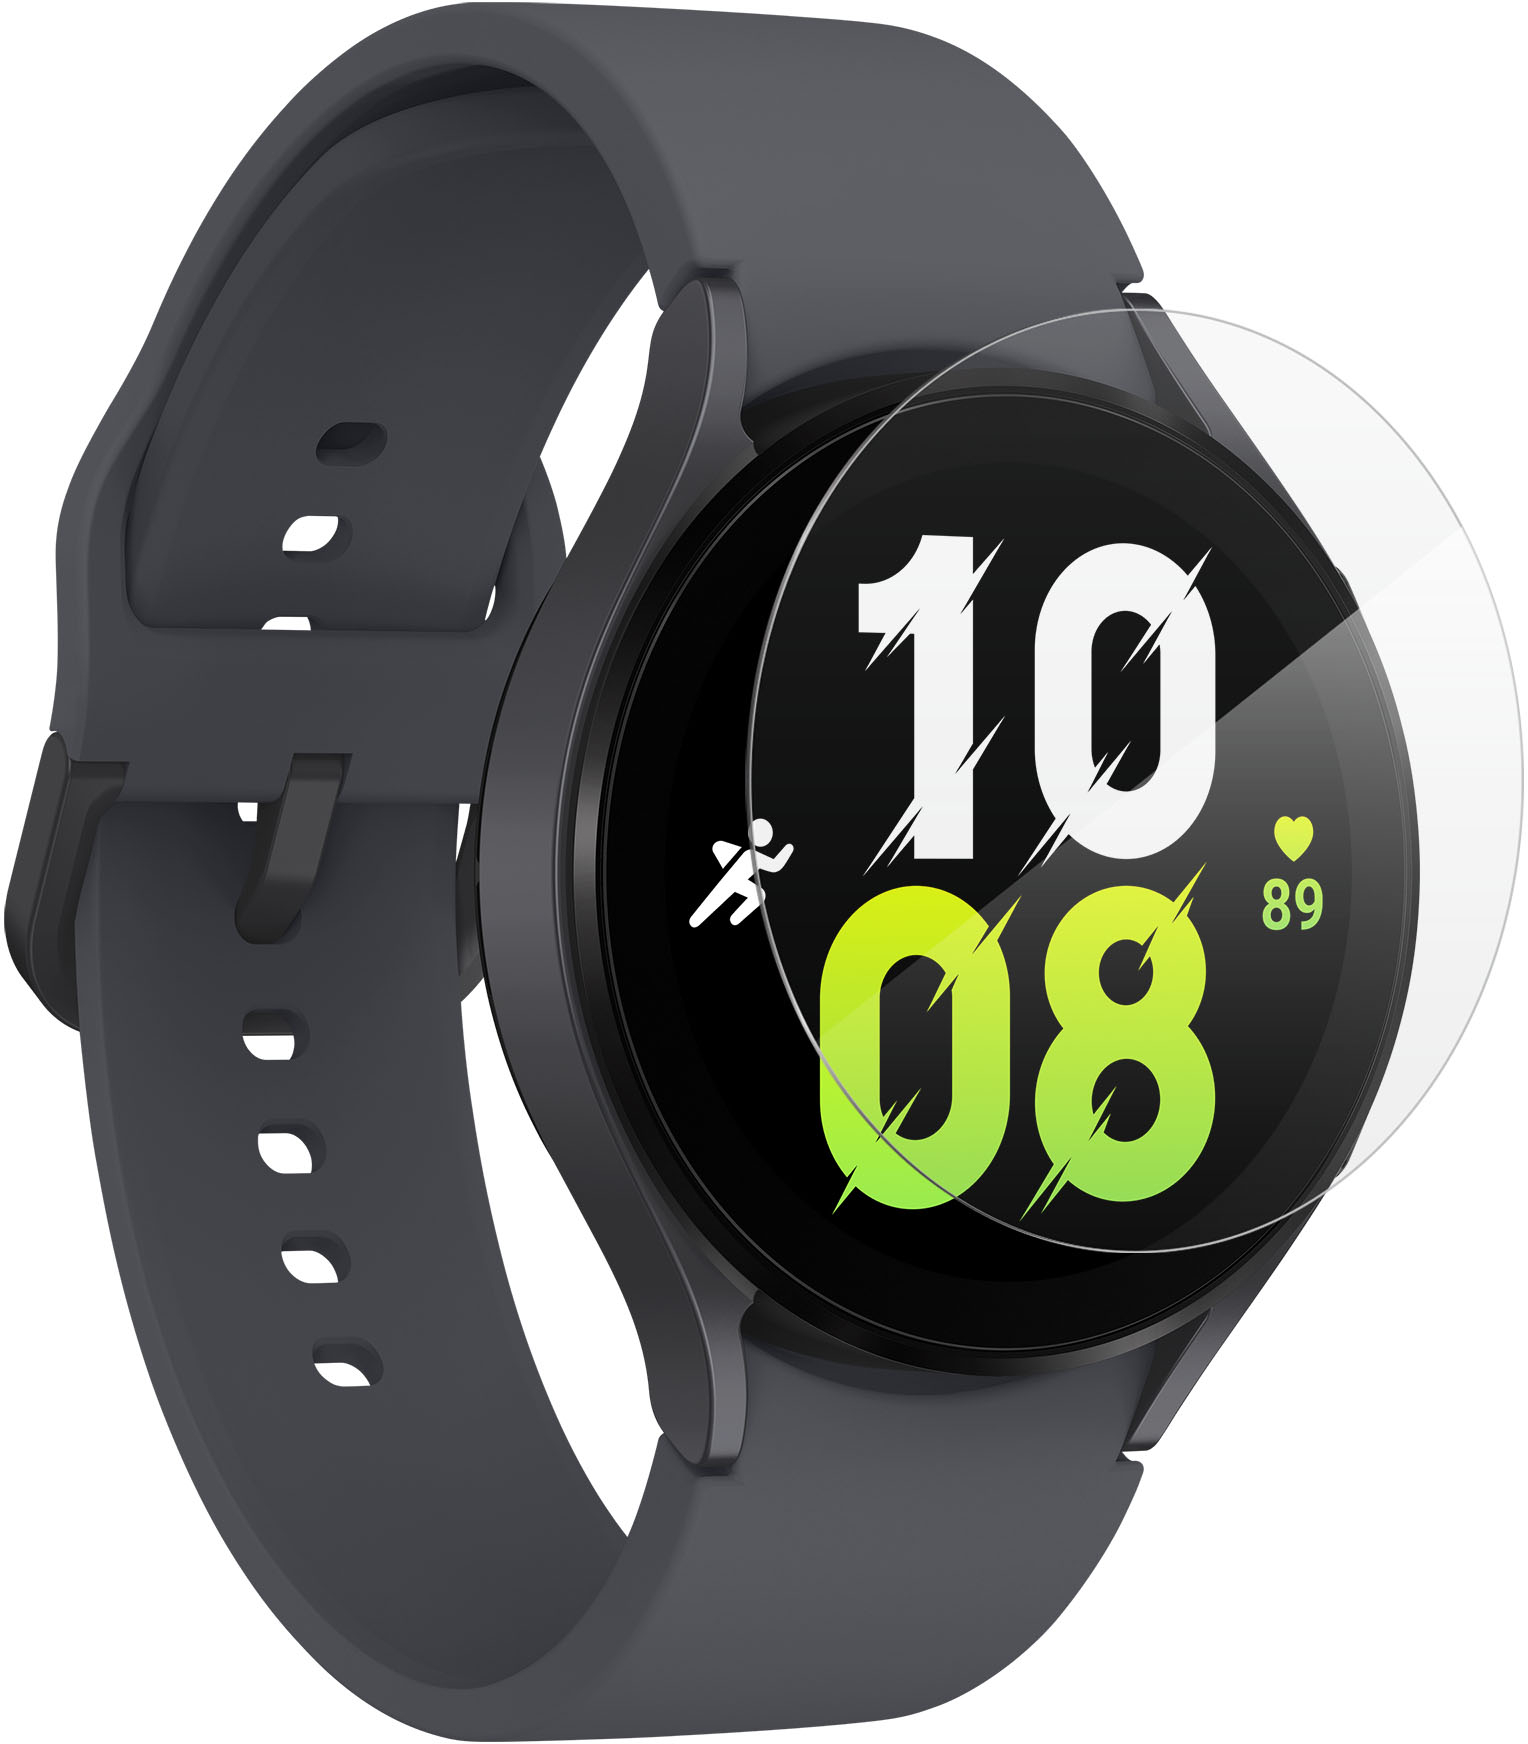 Angle View: ZAGG - InvisibleShield GlassFusion+ Flexible Hybrid Screen Protector for Samsung Galaxy Watch5, Galaxy Watch6 44mm - Clear